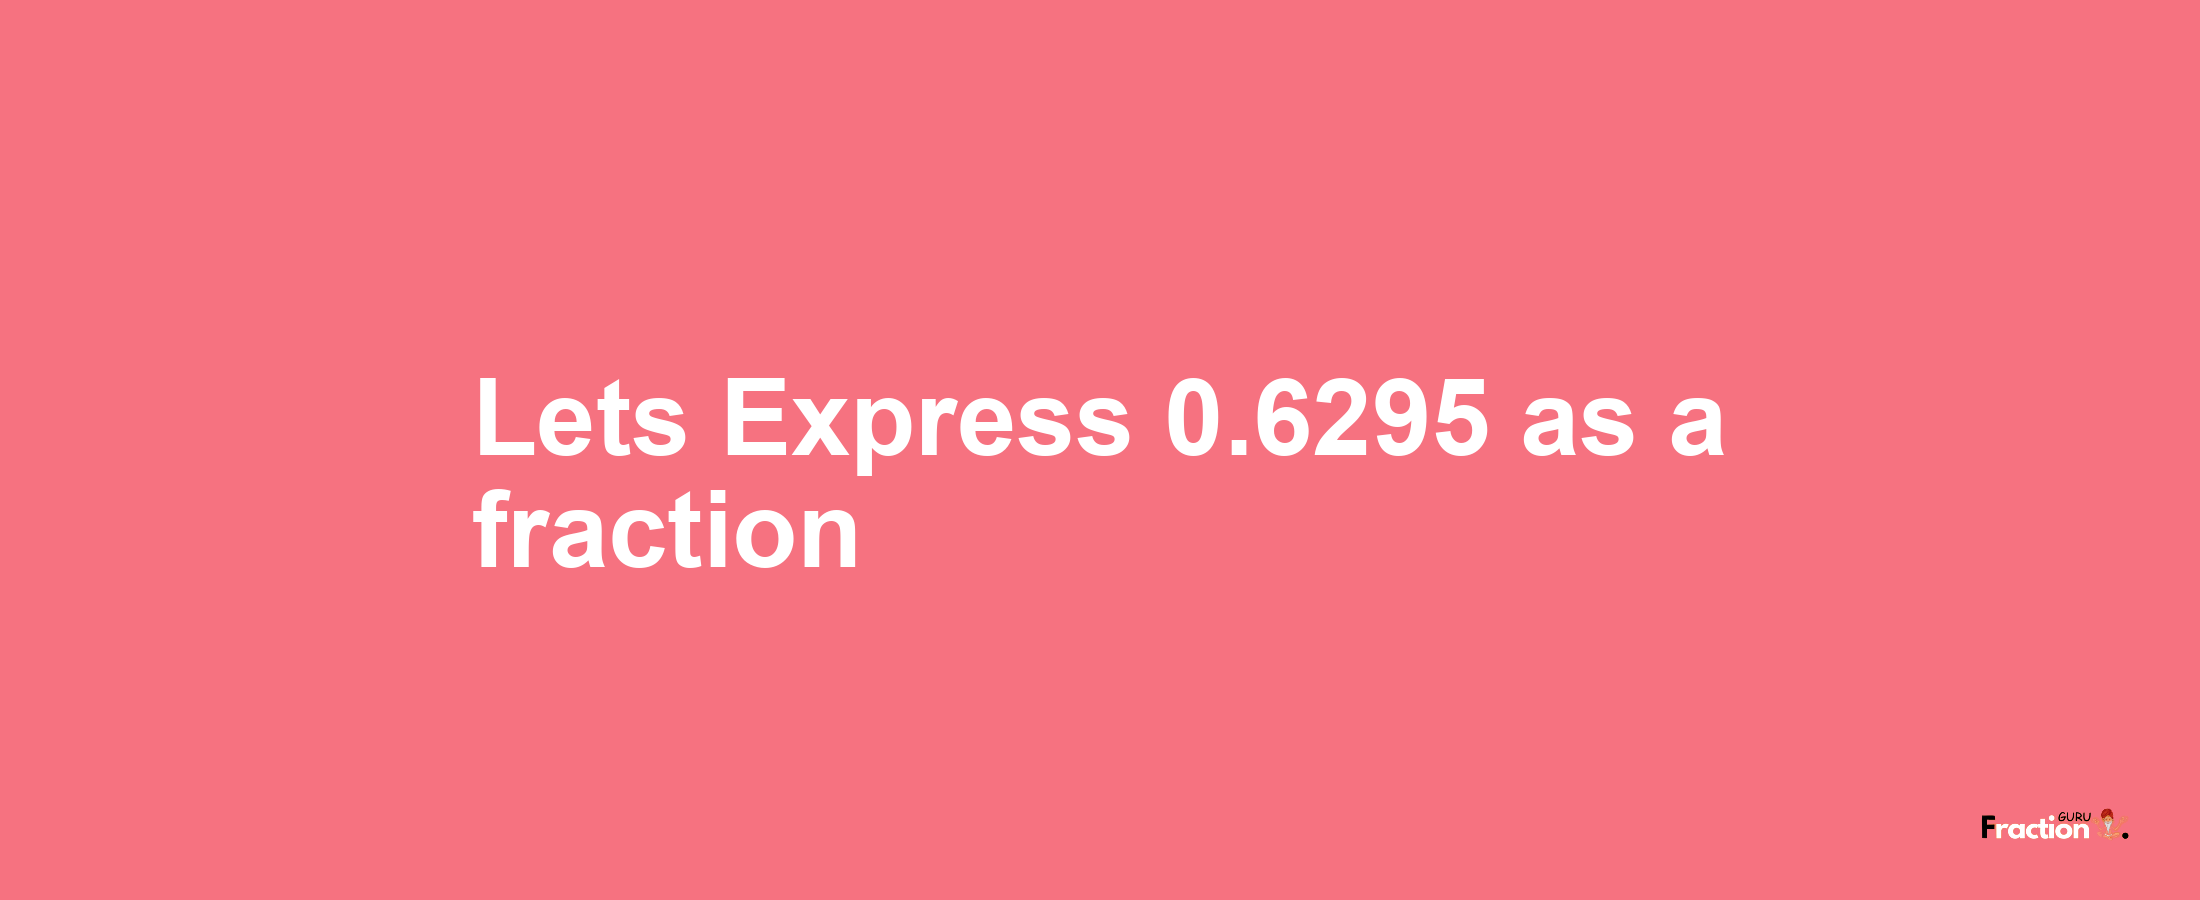 Lets Express 0.6295 as afraction